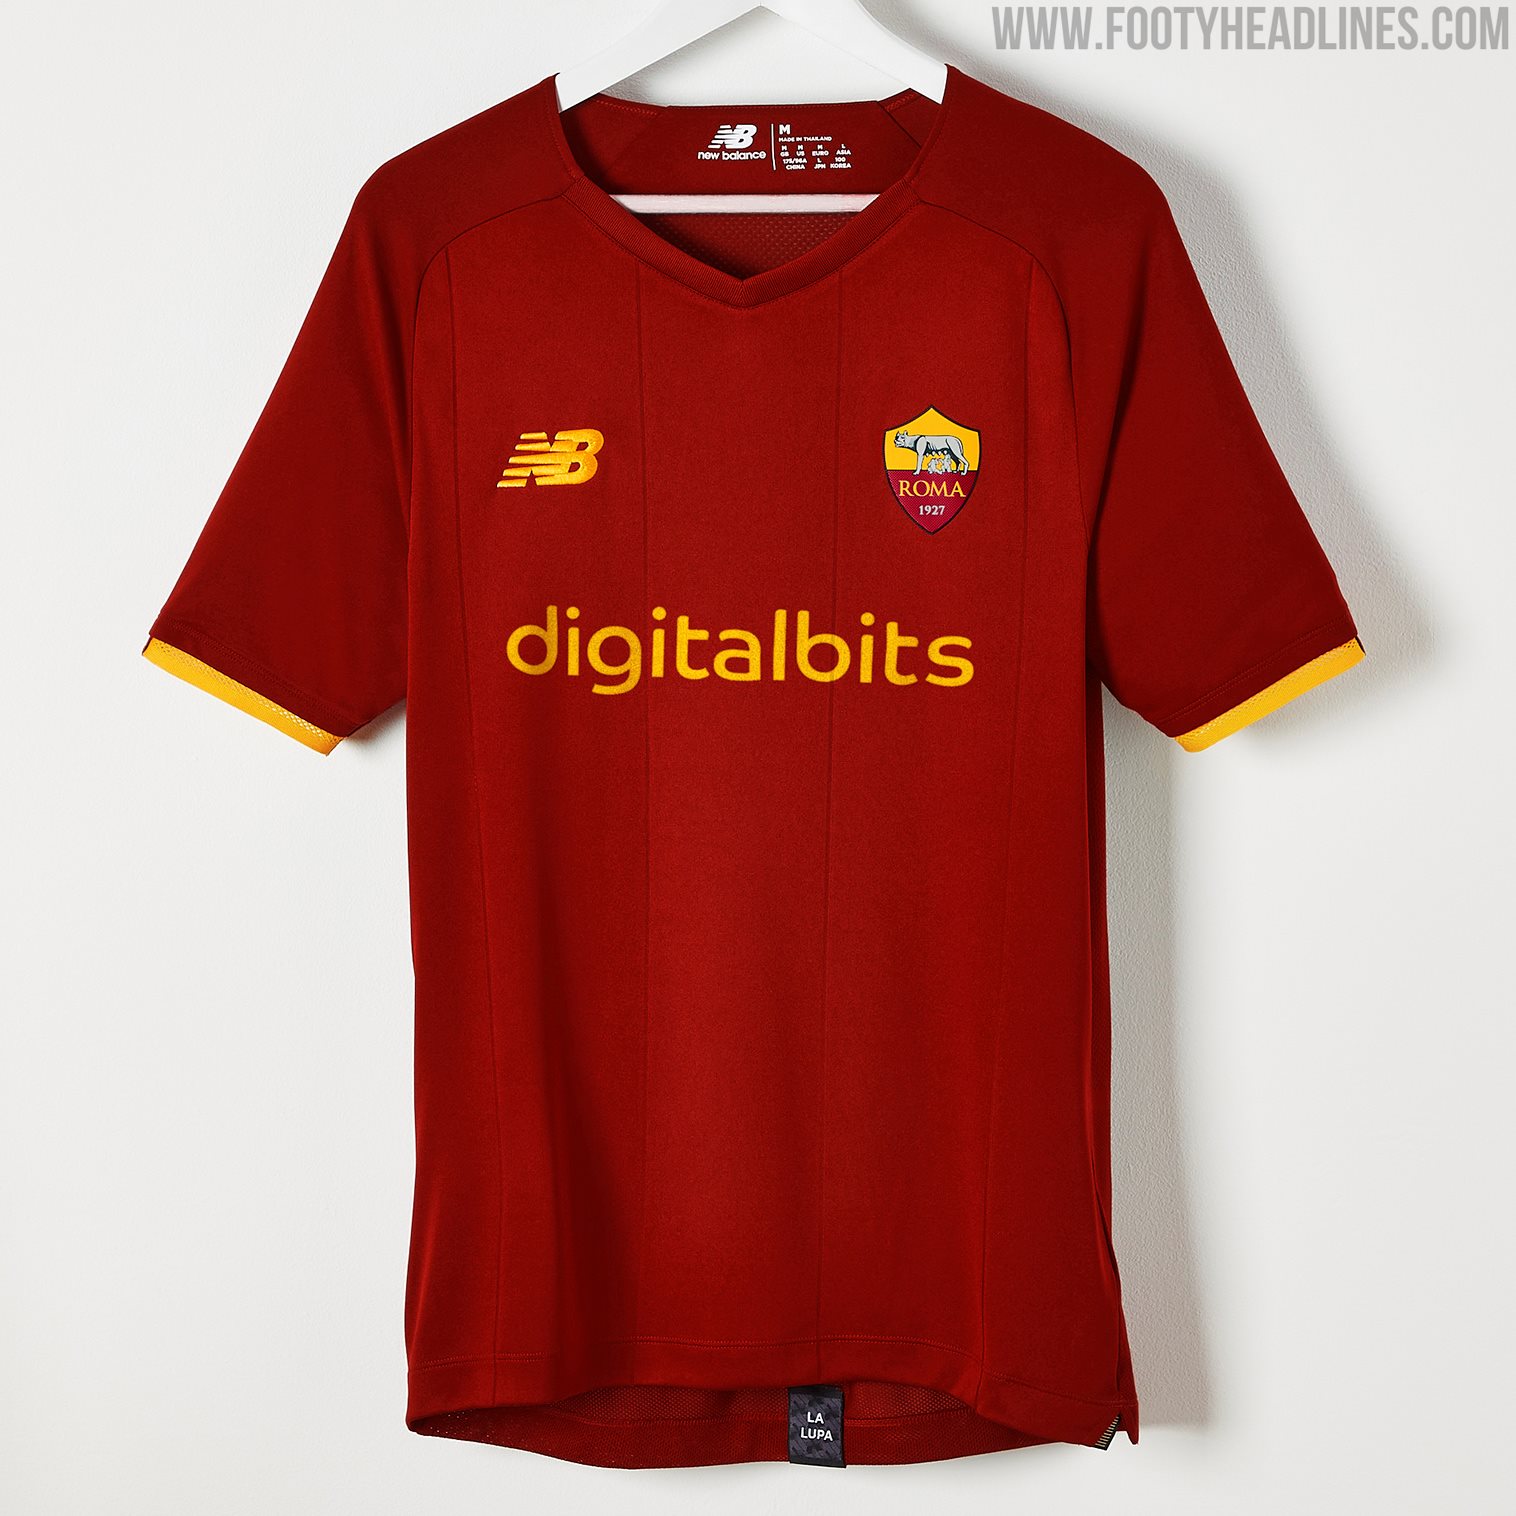 New Balance AS Roma 21-22 Home Kit Released - Footy Headlines